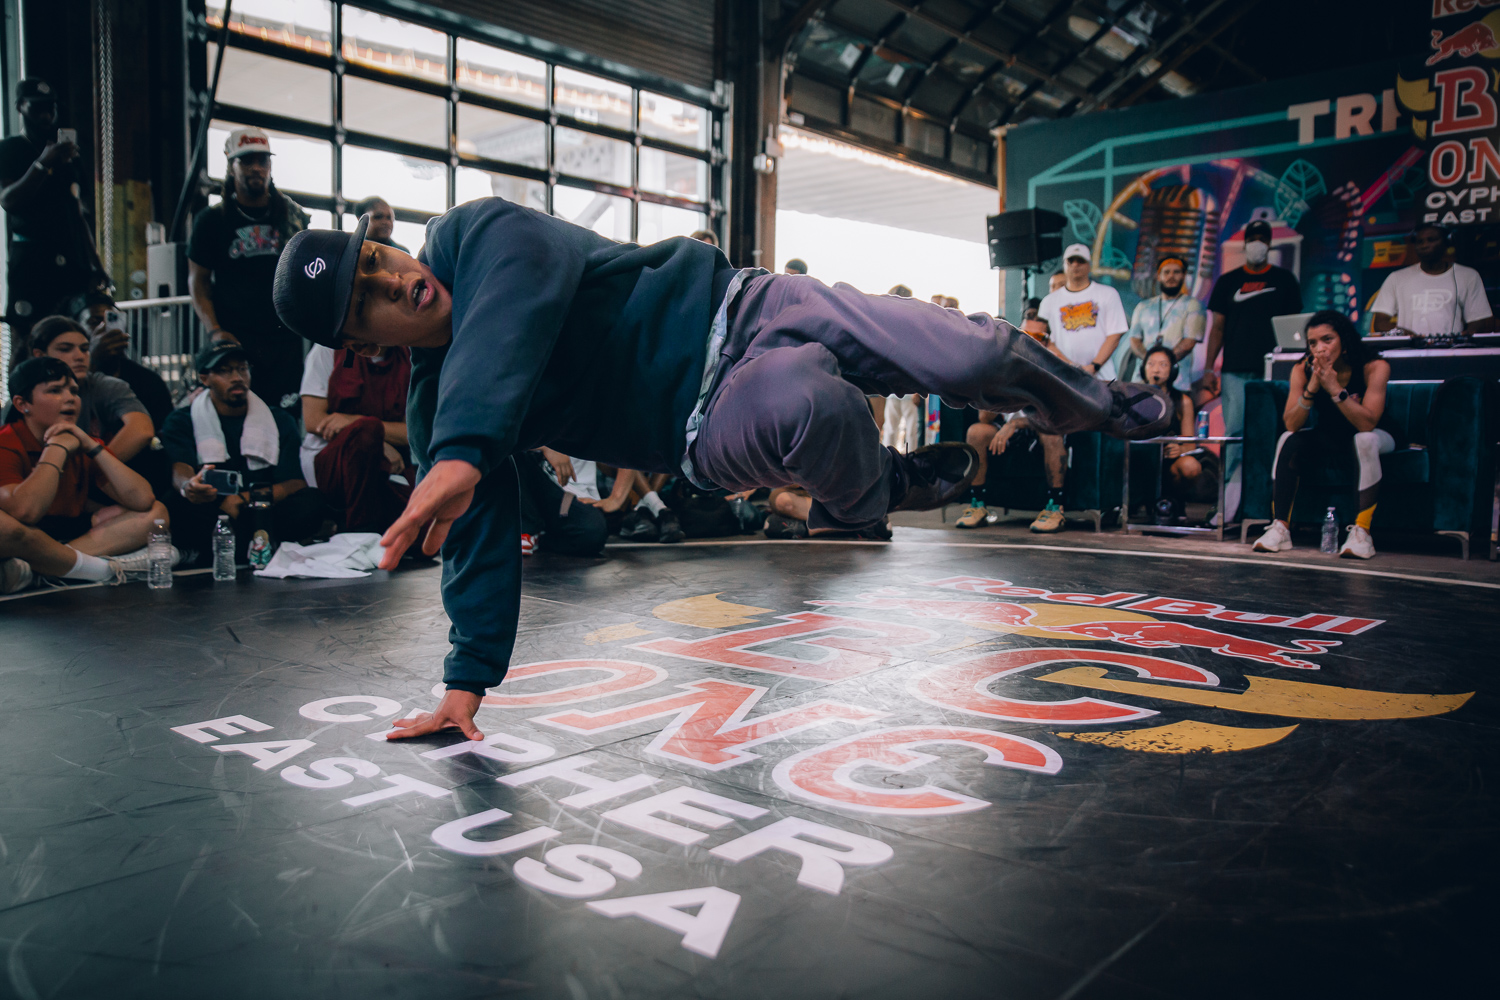 Dancer Dosu competes at the Red Bull BC One East USA Cypher on July 23, 2022 // Jeremy Gonzalo / Red Bull Content Pool